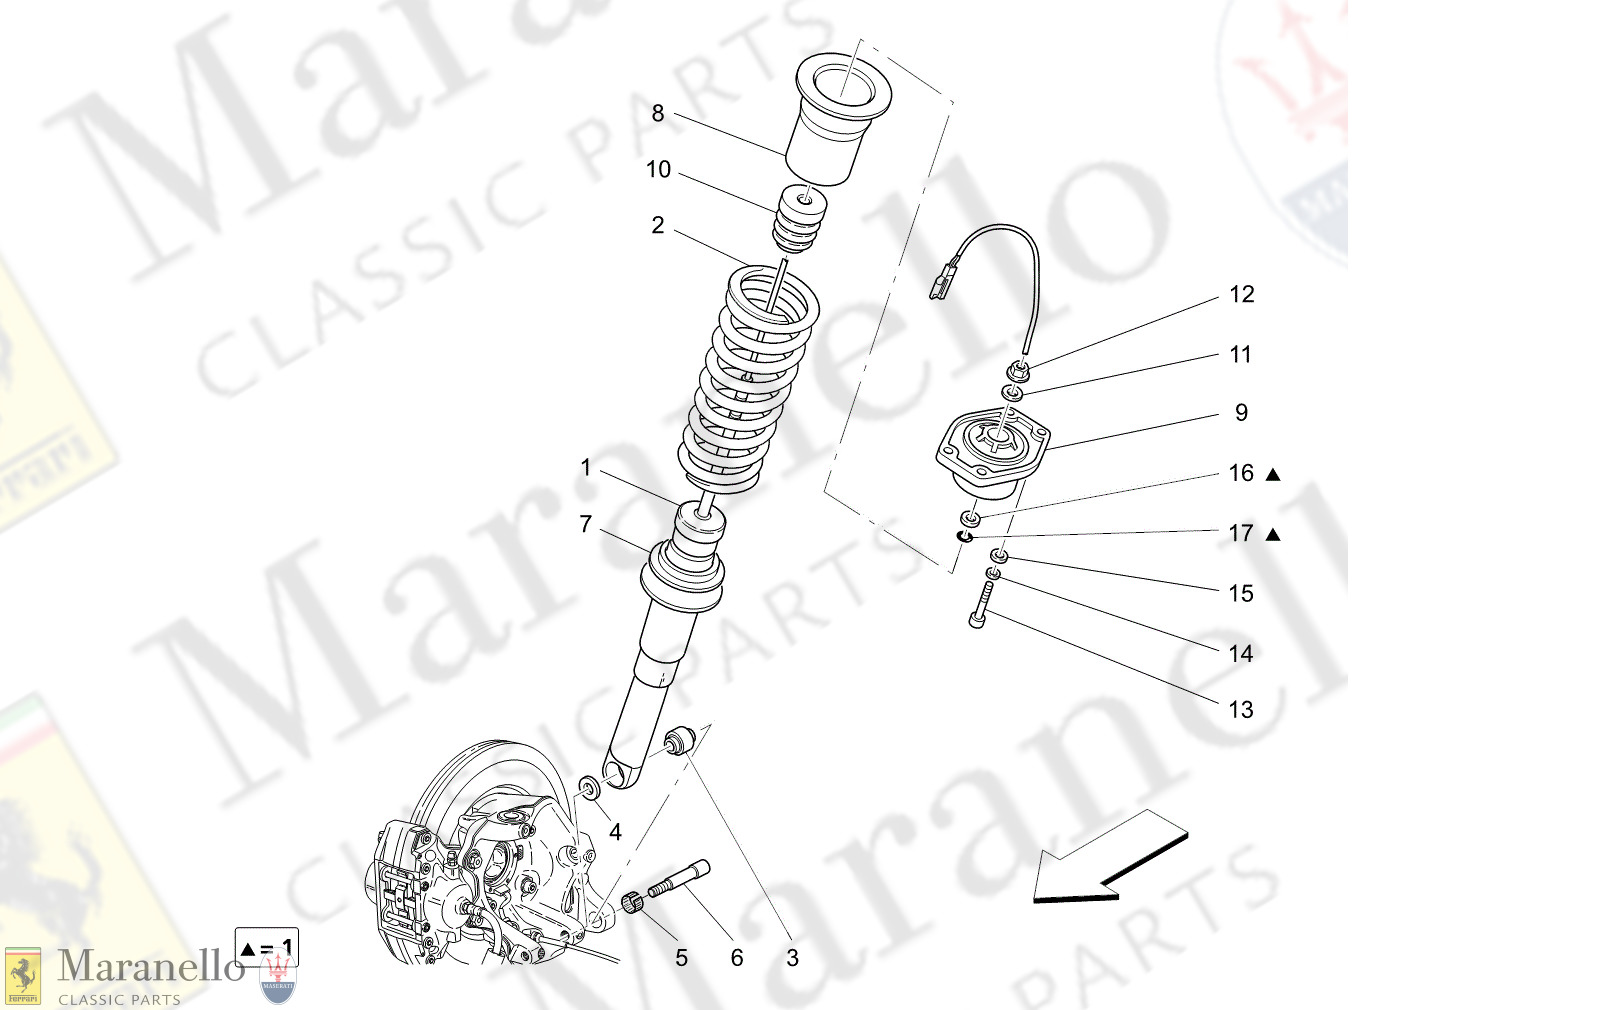 06.21 - 13 - 0621 - 13 Rear Shock Absorber Devices